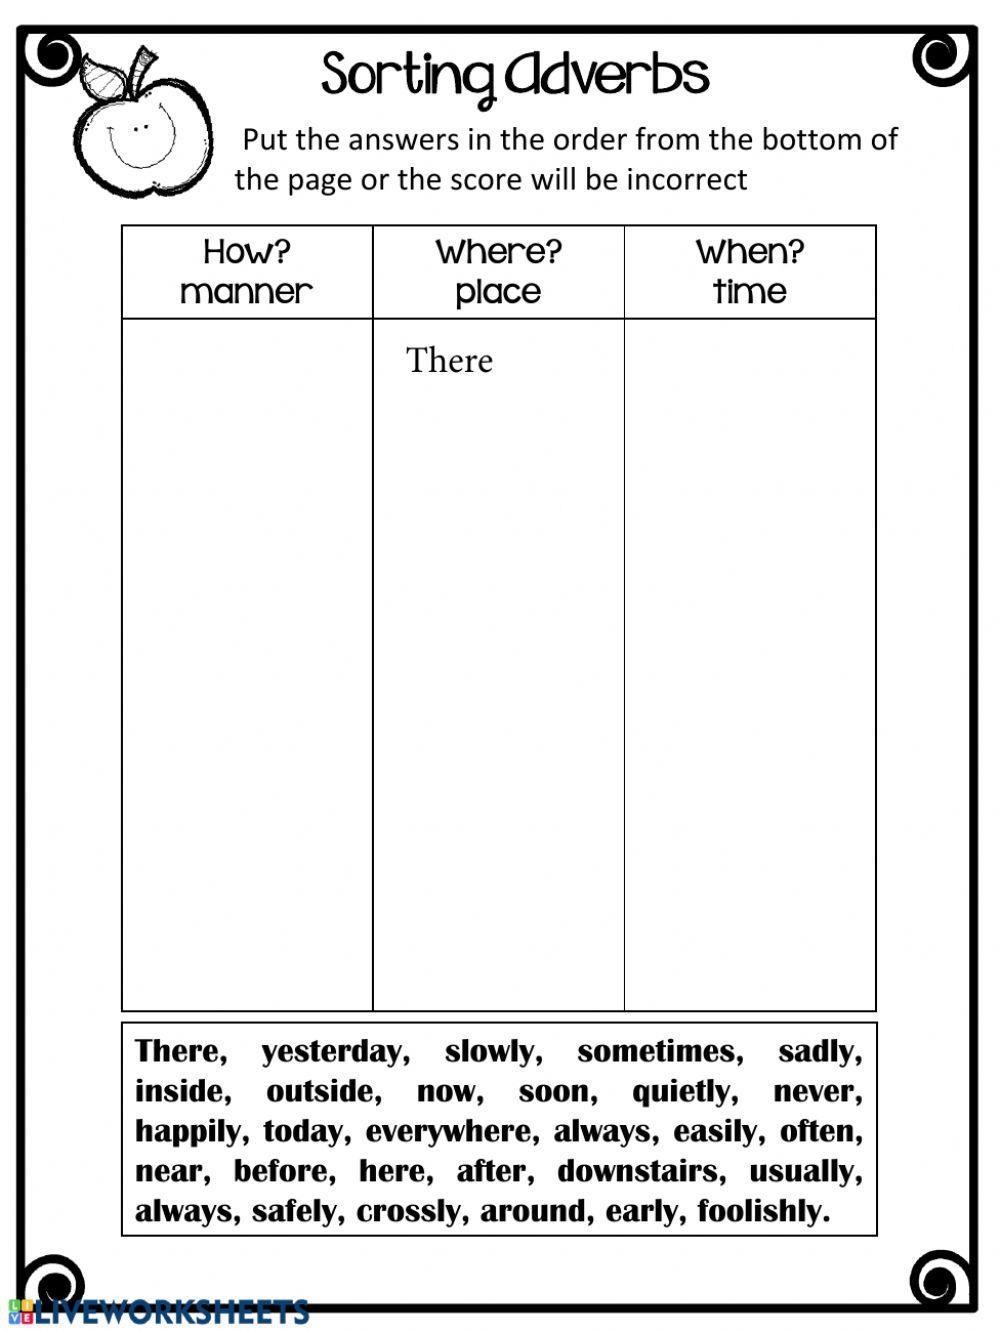 Adverbs - Manner, Time, Place Sort